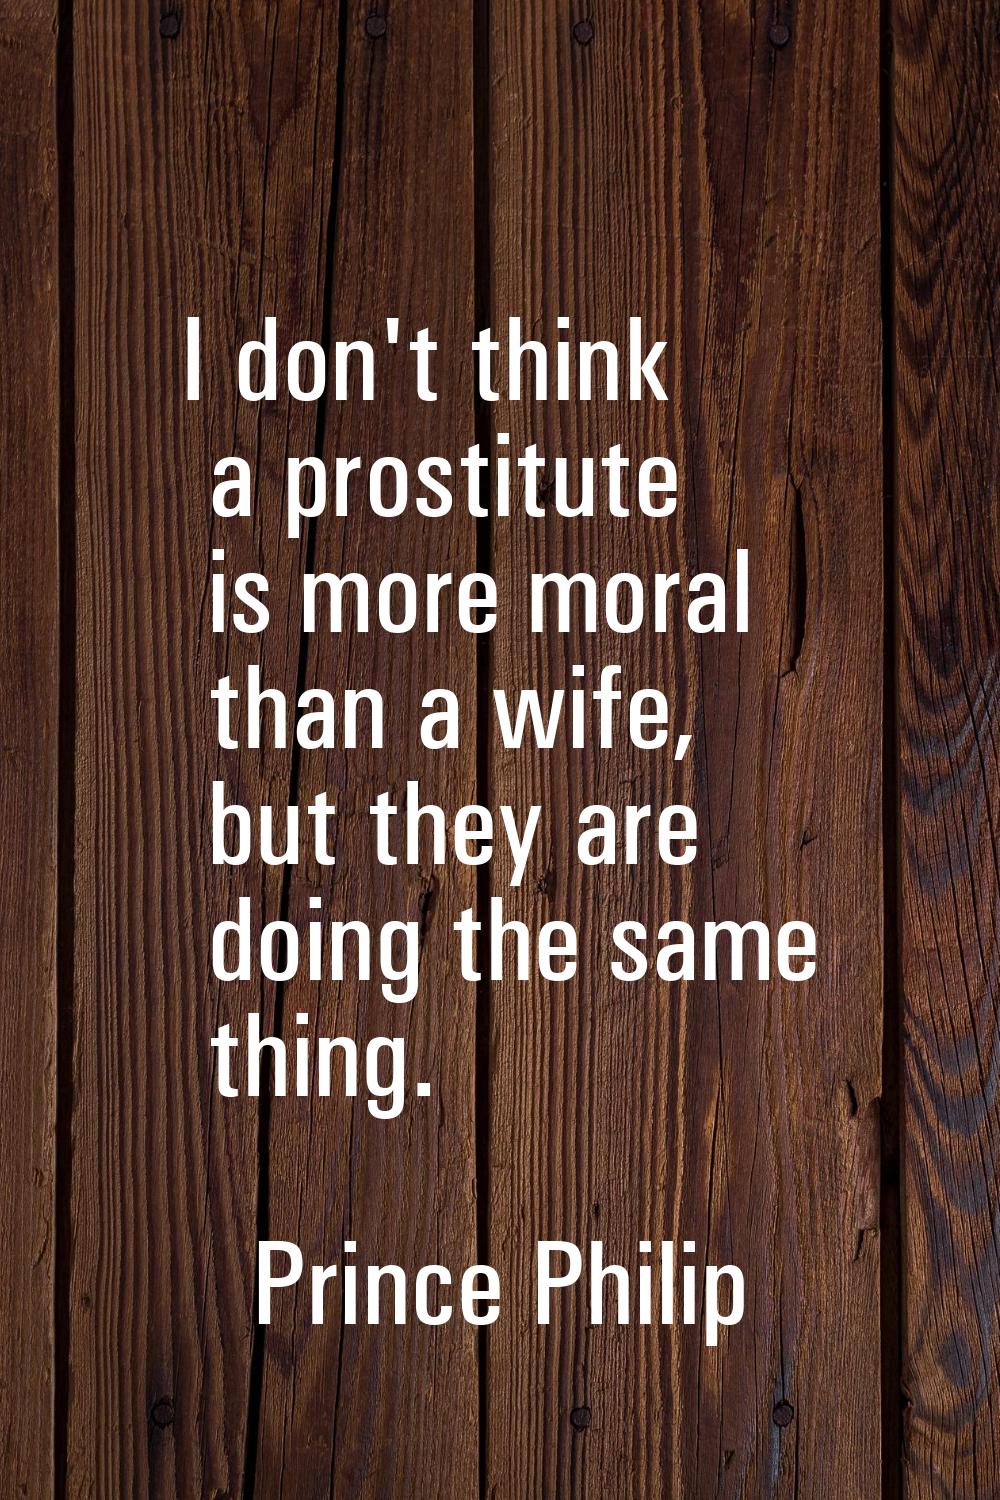 I don't think a prostitute is more moral than a wife, but they are doing the same thing.